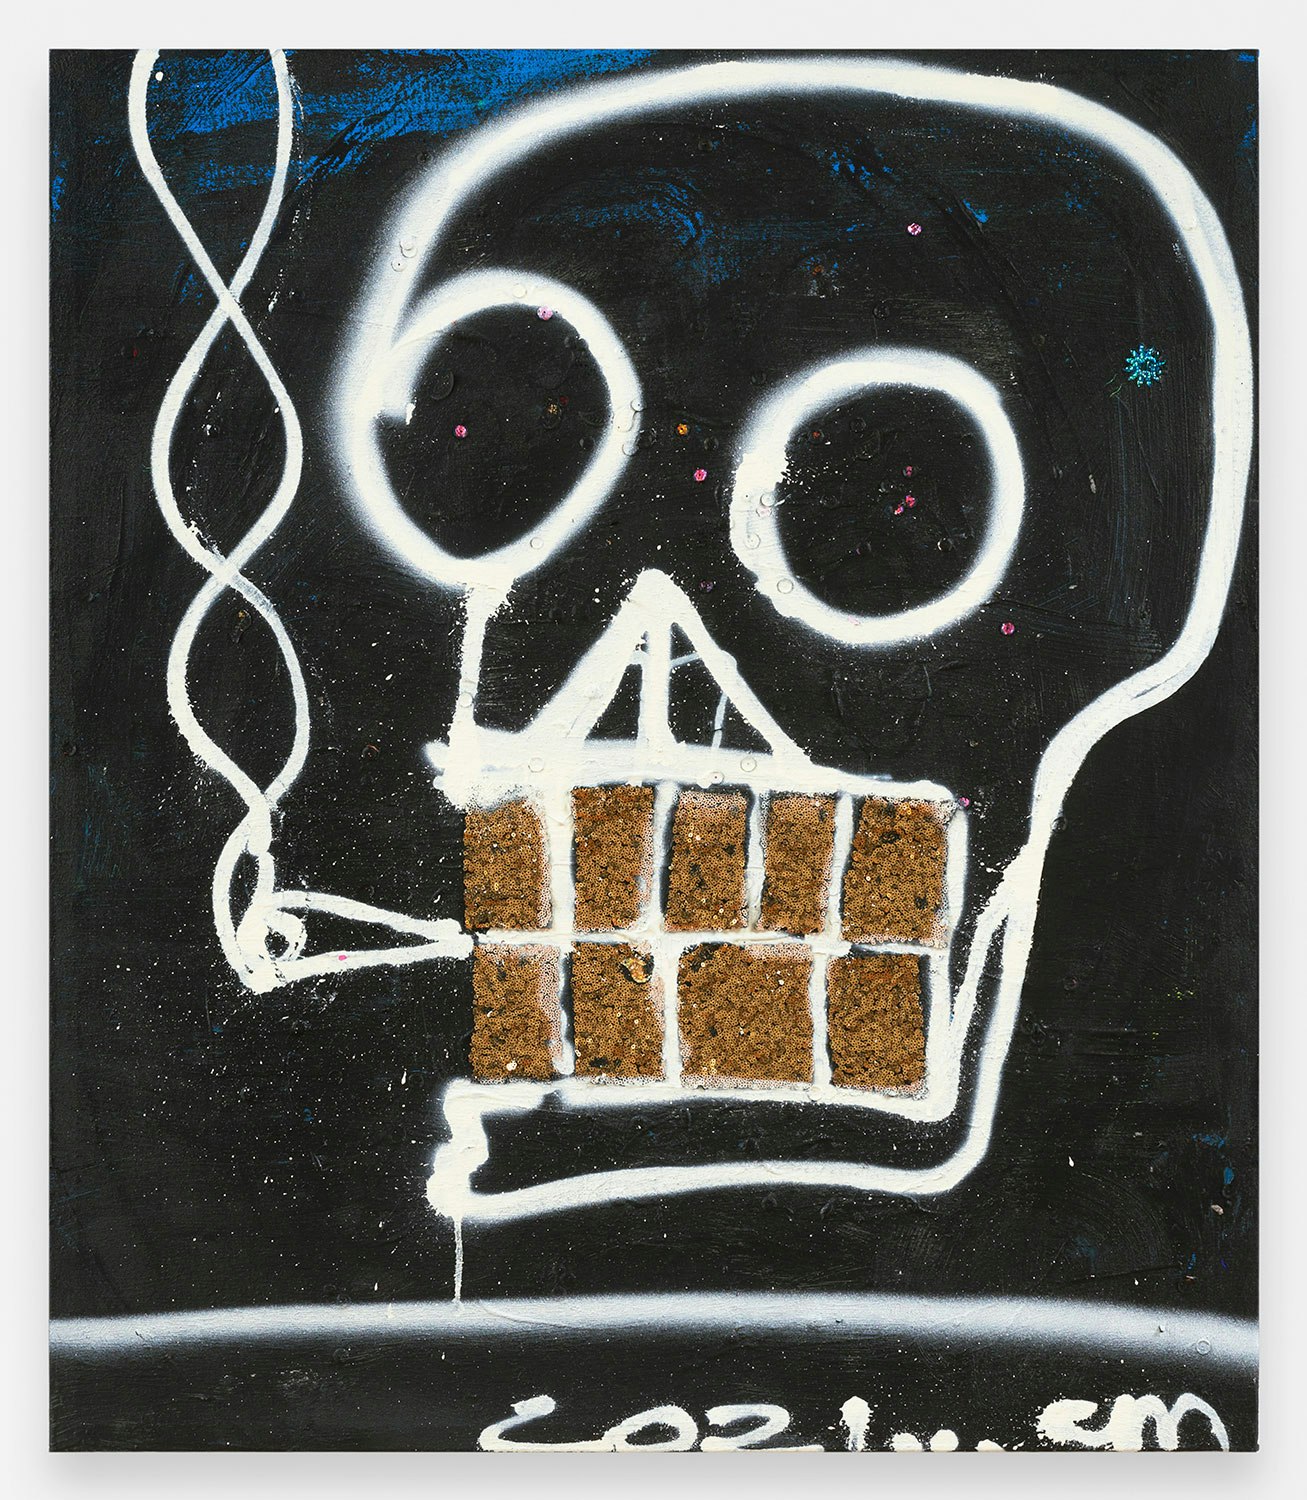 Chris Martin, <em>Gold Teeth for Lance De Los Reyes</em>, 2021. Acrylic, spraypaint, and collage on canvas, 40 x 34 1/2 inches. © Chris Martin. Courtesy the artist and Anton Kern Gallery, New York.